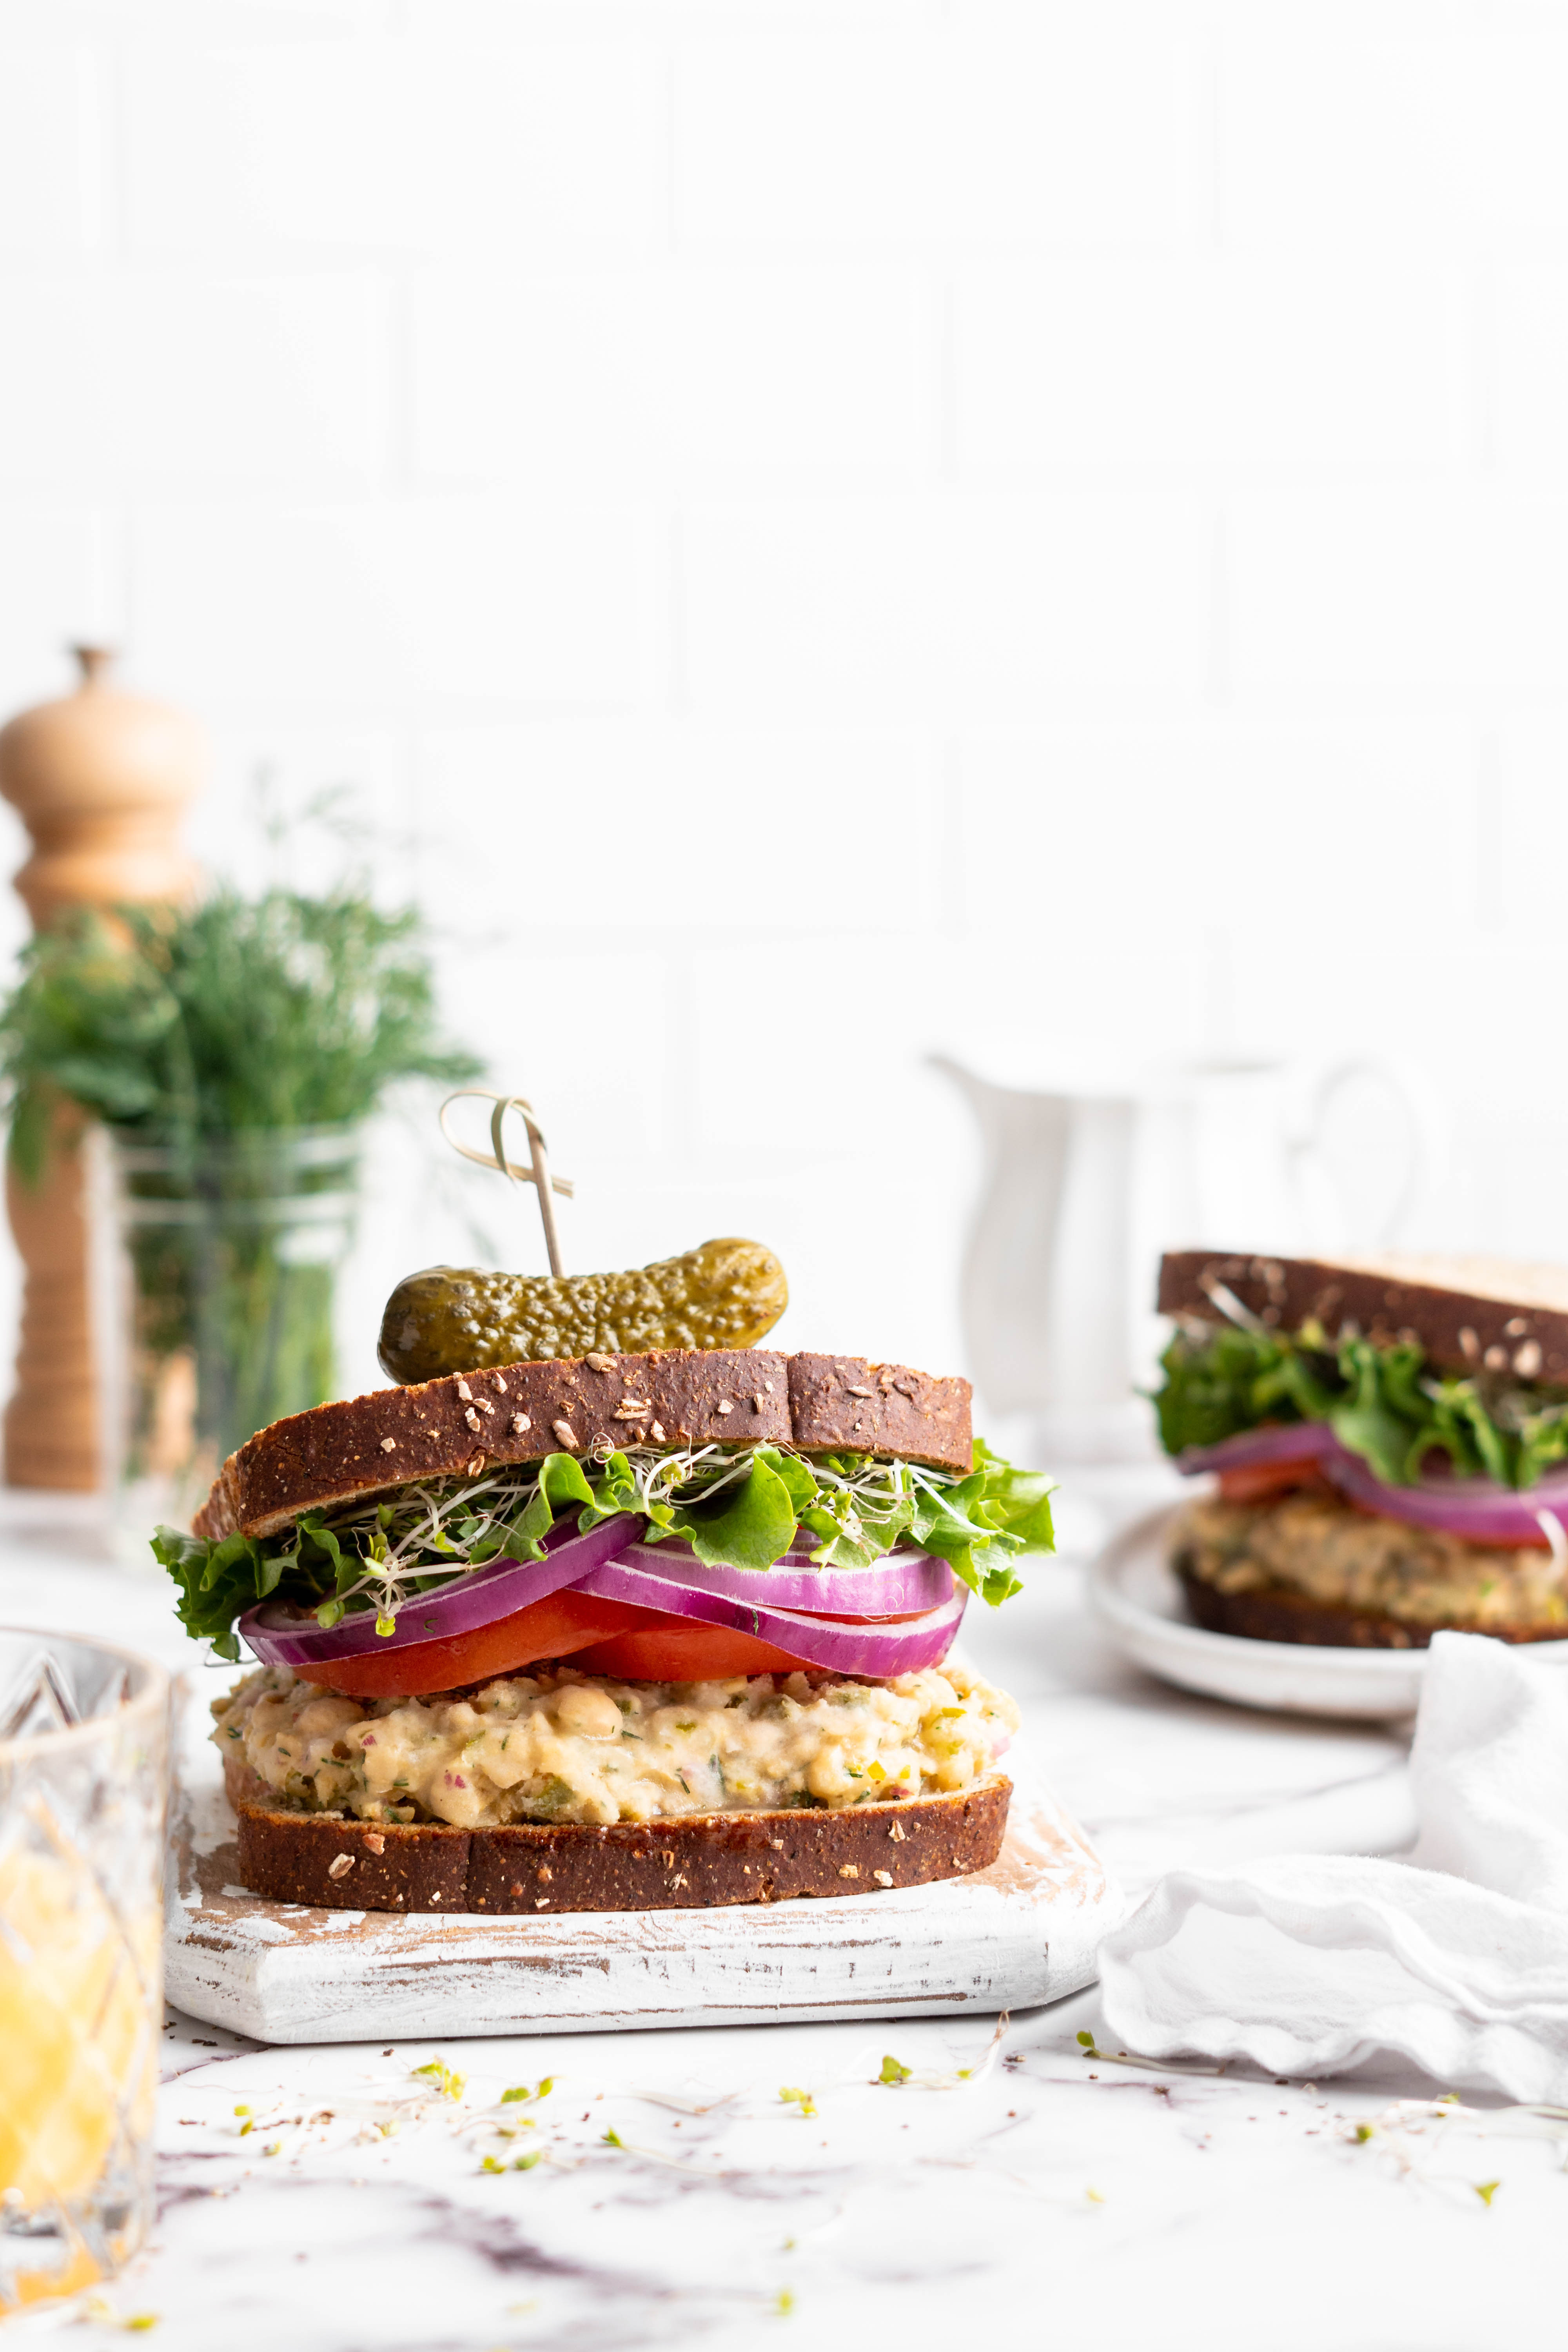 Vegan tuna sandwiches topped with tomatoes, red onions, and sprouts